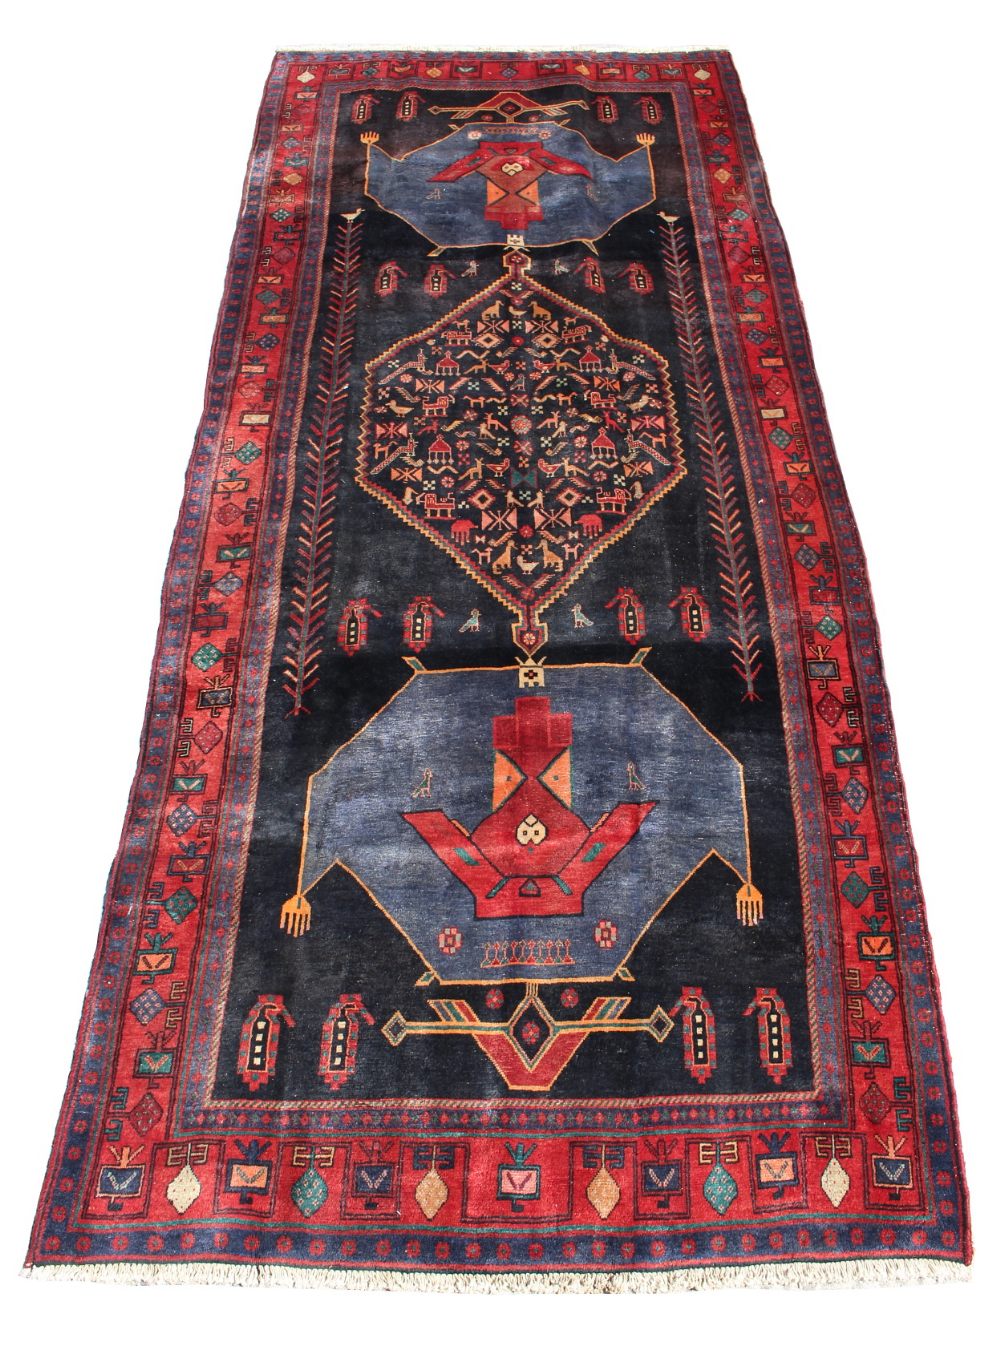 A Kordi woollen hand-made runner with navy ground, 140 by 59ins. (355 by 150cms.) (see